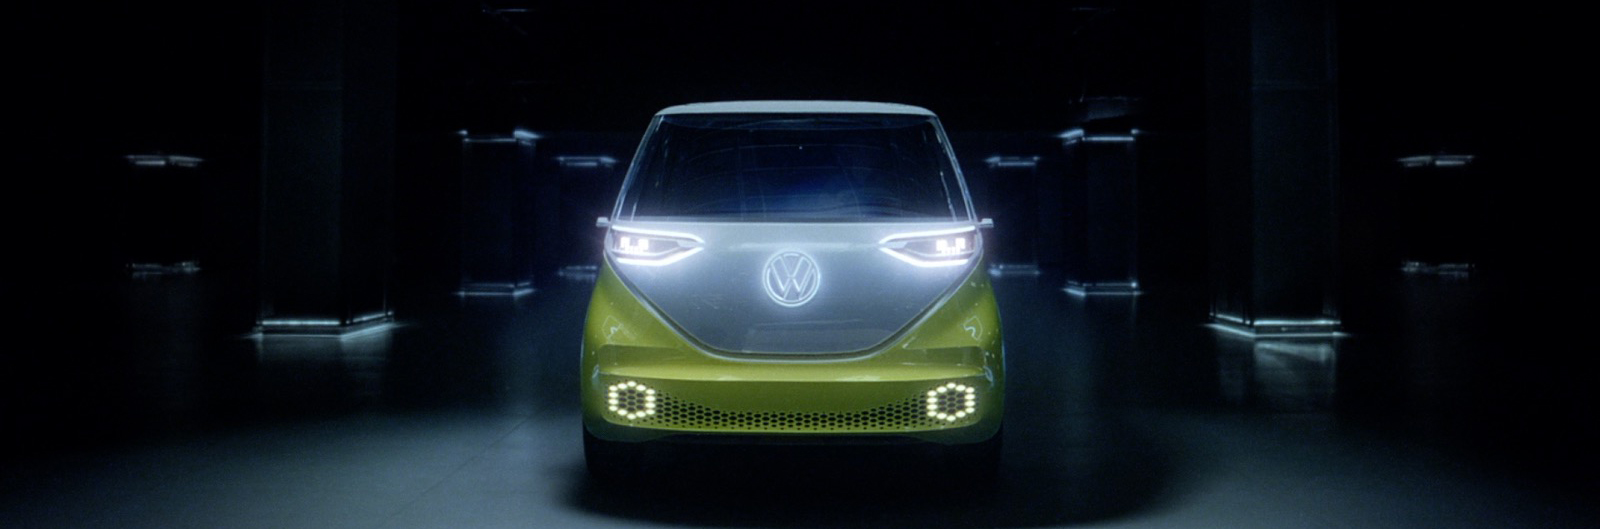 VW Says Hello to the Light